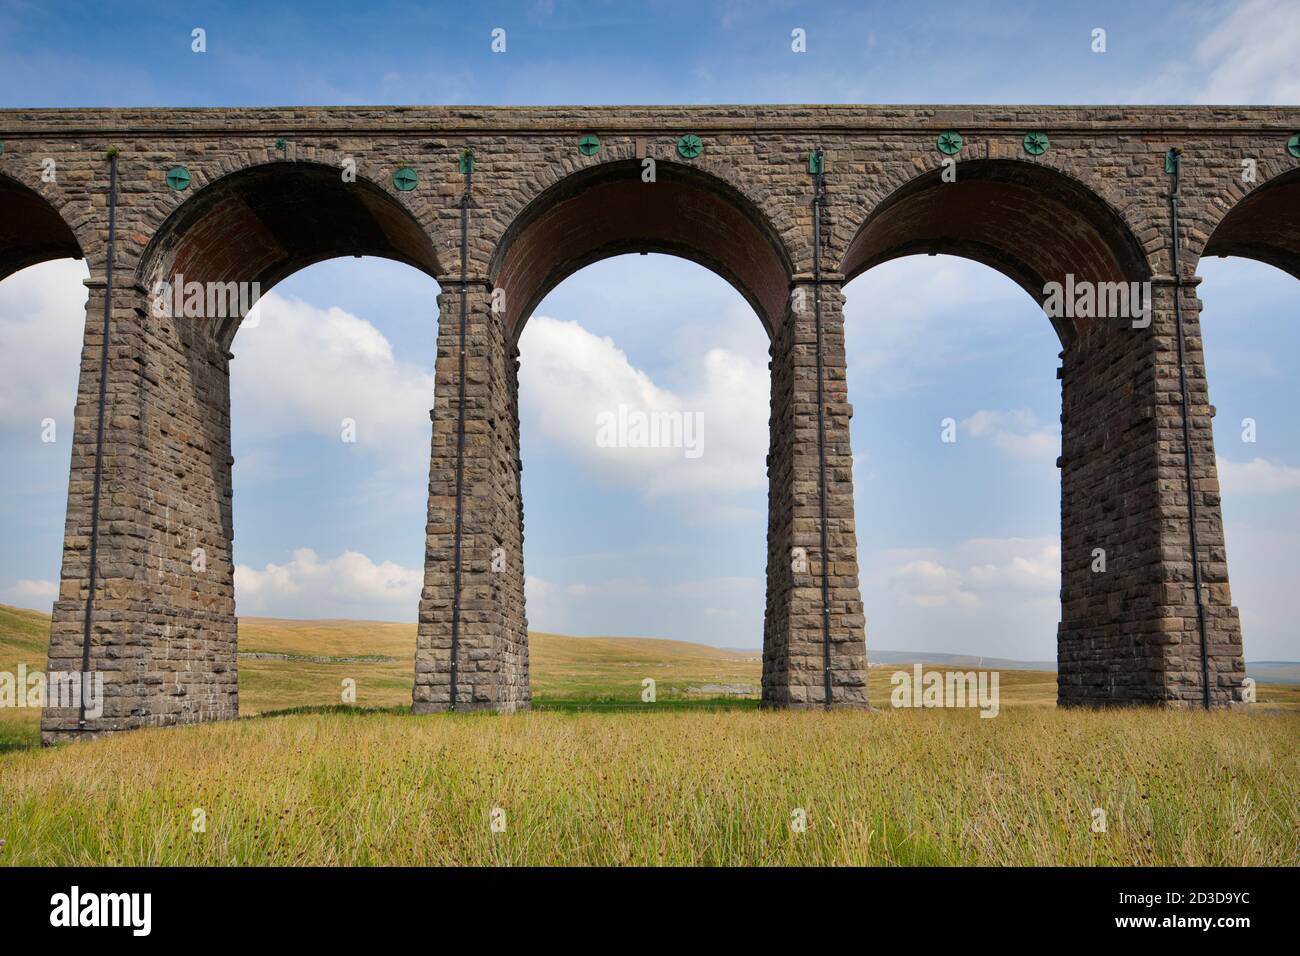 The arches at Ribblehead Viaduct which spans Batty Moss, near Horton-In-Ribblesdale, Yorkshire Dales, UK Stock Photo